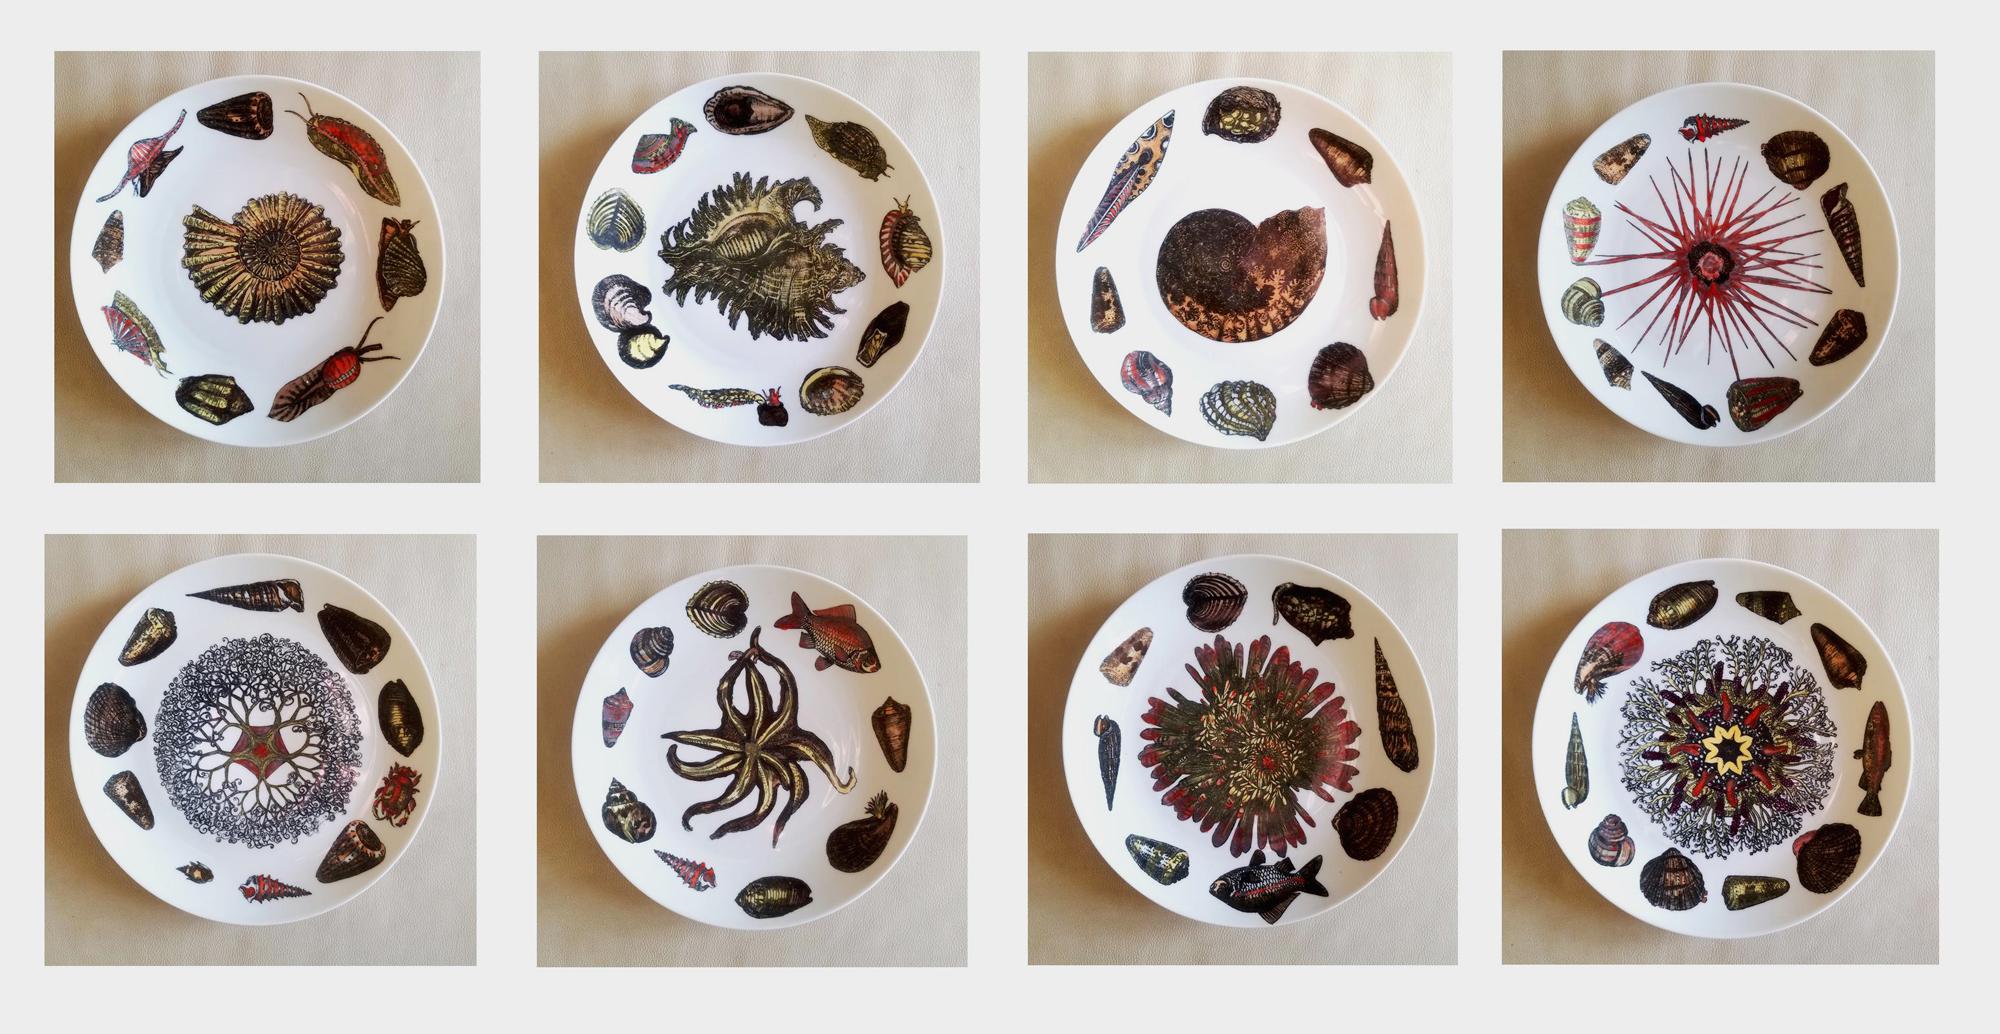 Piero Fornasetti porcelain Conchiglie seashell plates with snails and mollusks,
Set of Six,
circa 1960s-1970s

The Fornasetti plate is decorated in the Conchiglie pattern which depicts different sea shells and sea anemones. The plate is transfer